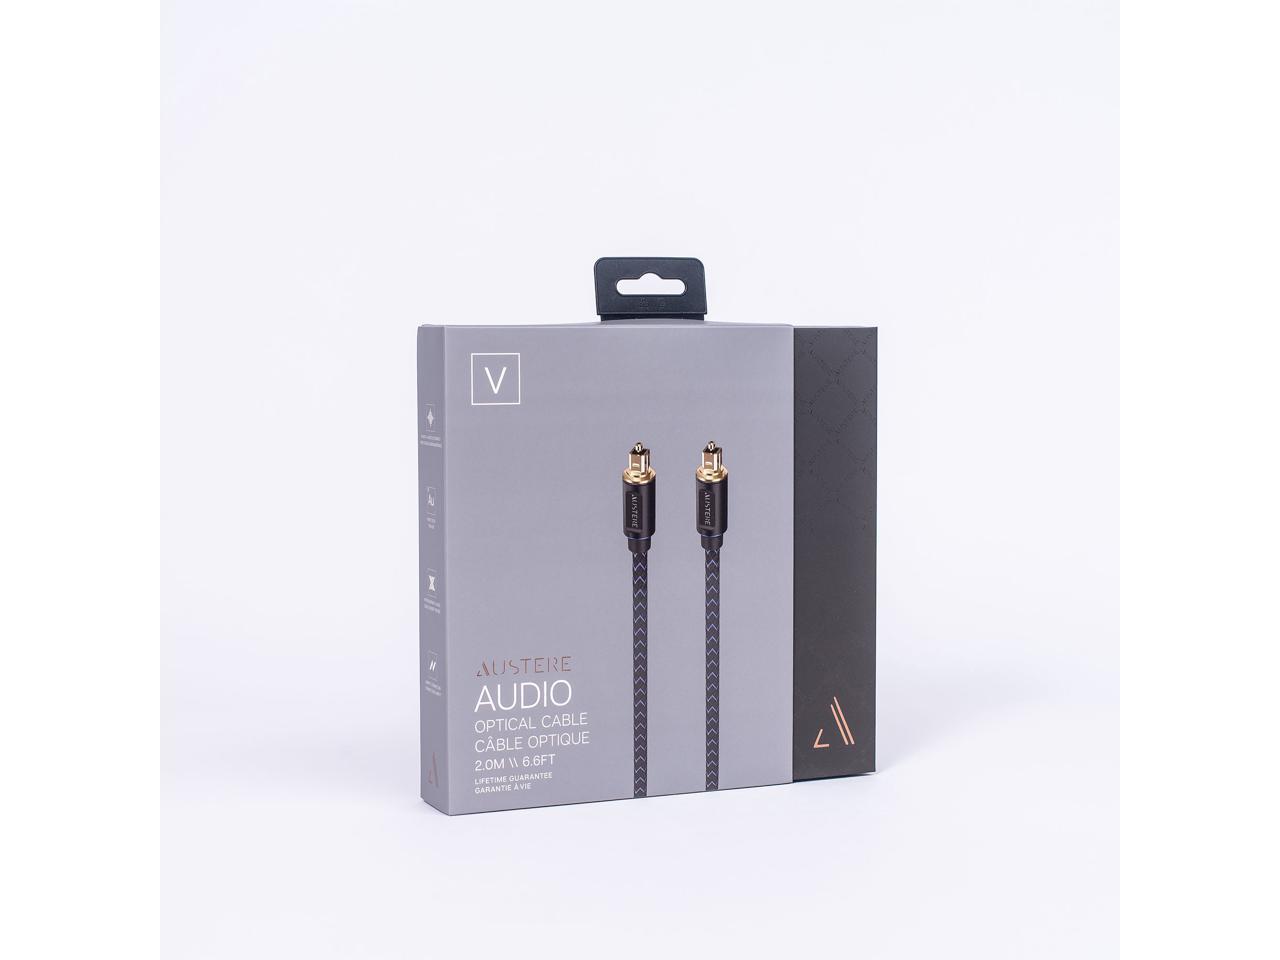 Austere V Series Optical Audio Cable 2.0m Precision-Polished Termination for Digital Audio Accuracy Pure Gold Connectors aDesign Precision LinkFit Housing & WovenArmor High-Flex Cable 